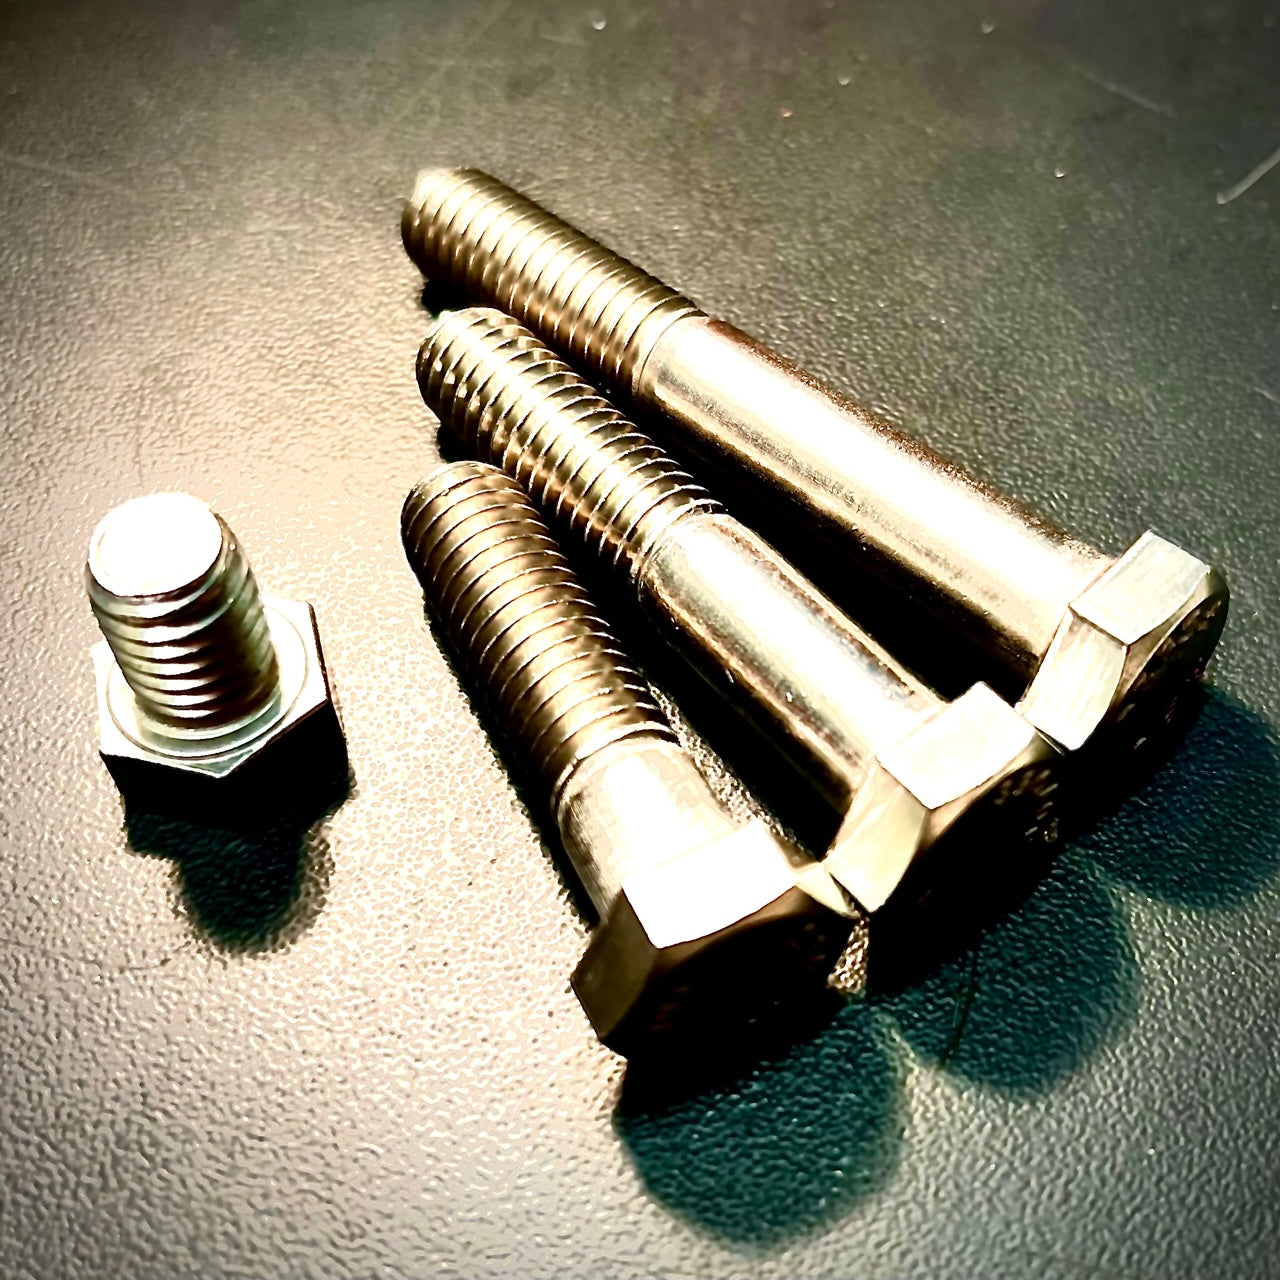 UNC 1/2" Hex Bolt and Set Screws A2 304 Stainless Steel DIN931 - Fixaball Ltd. Fixings and Fasteners UK